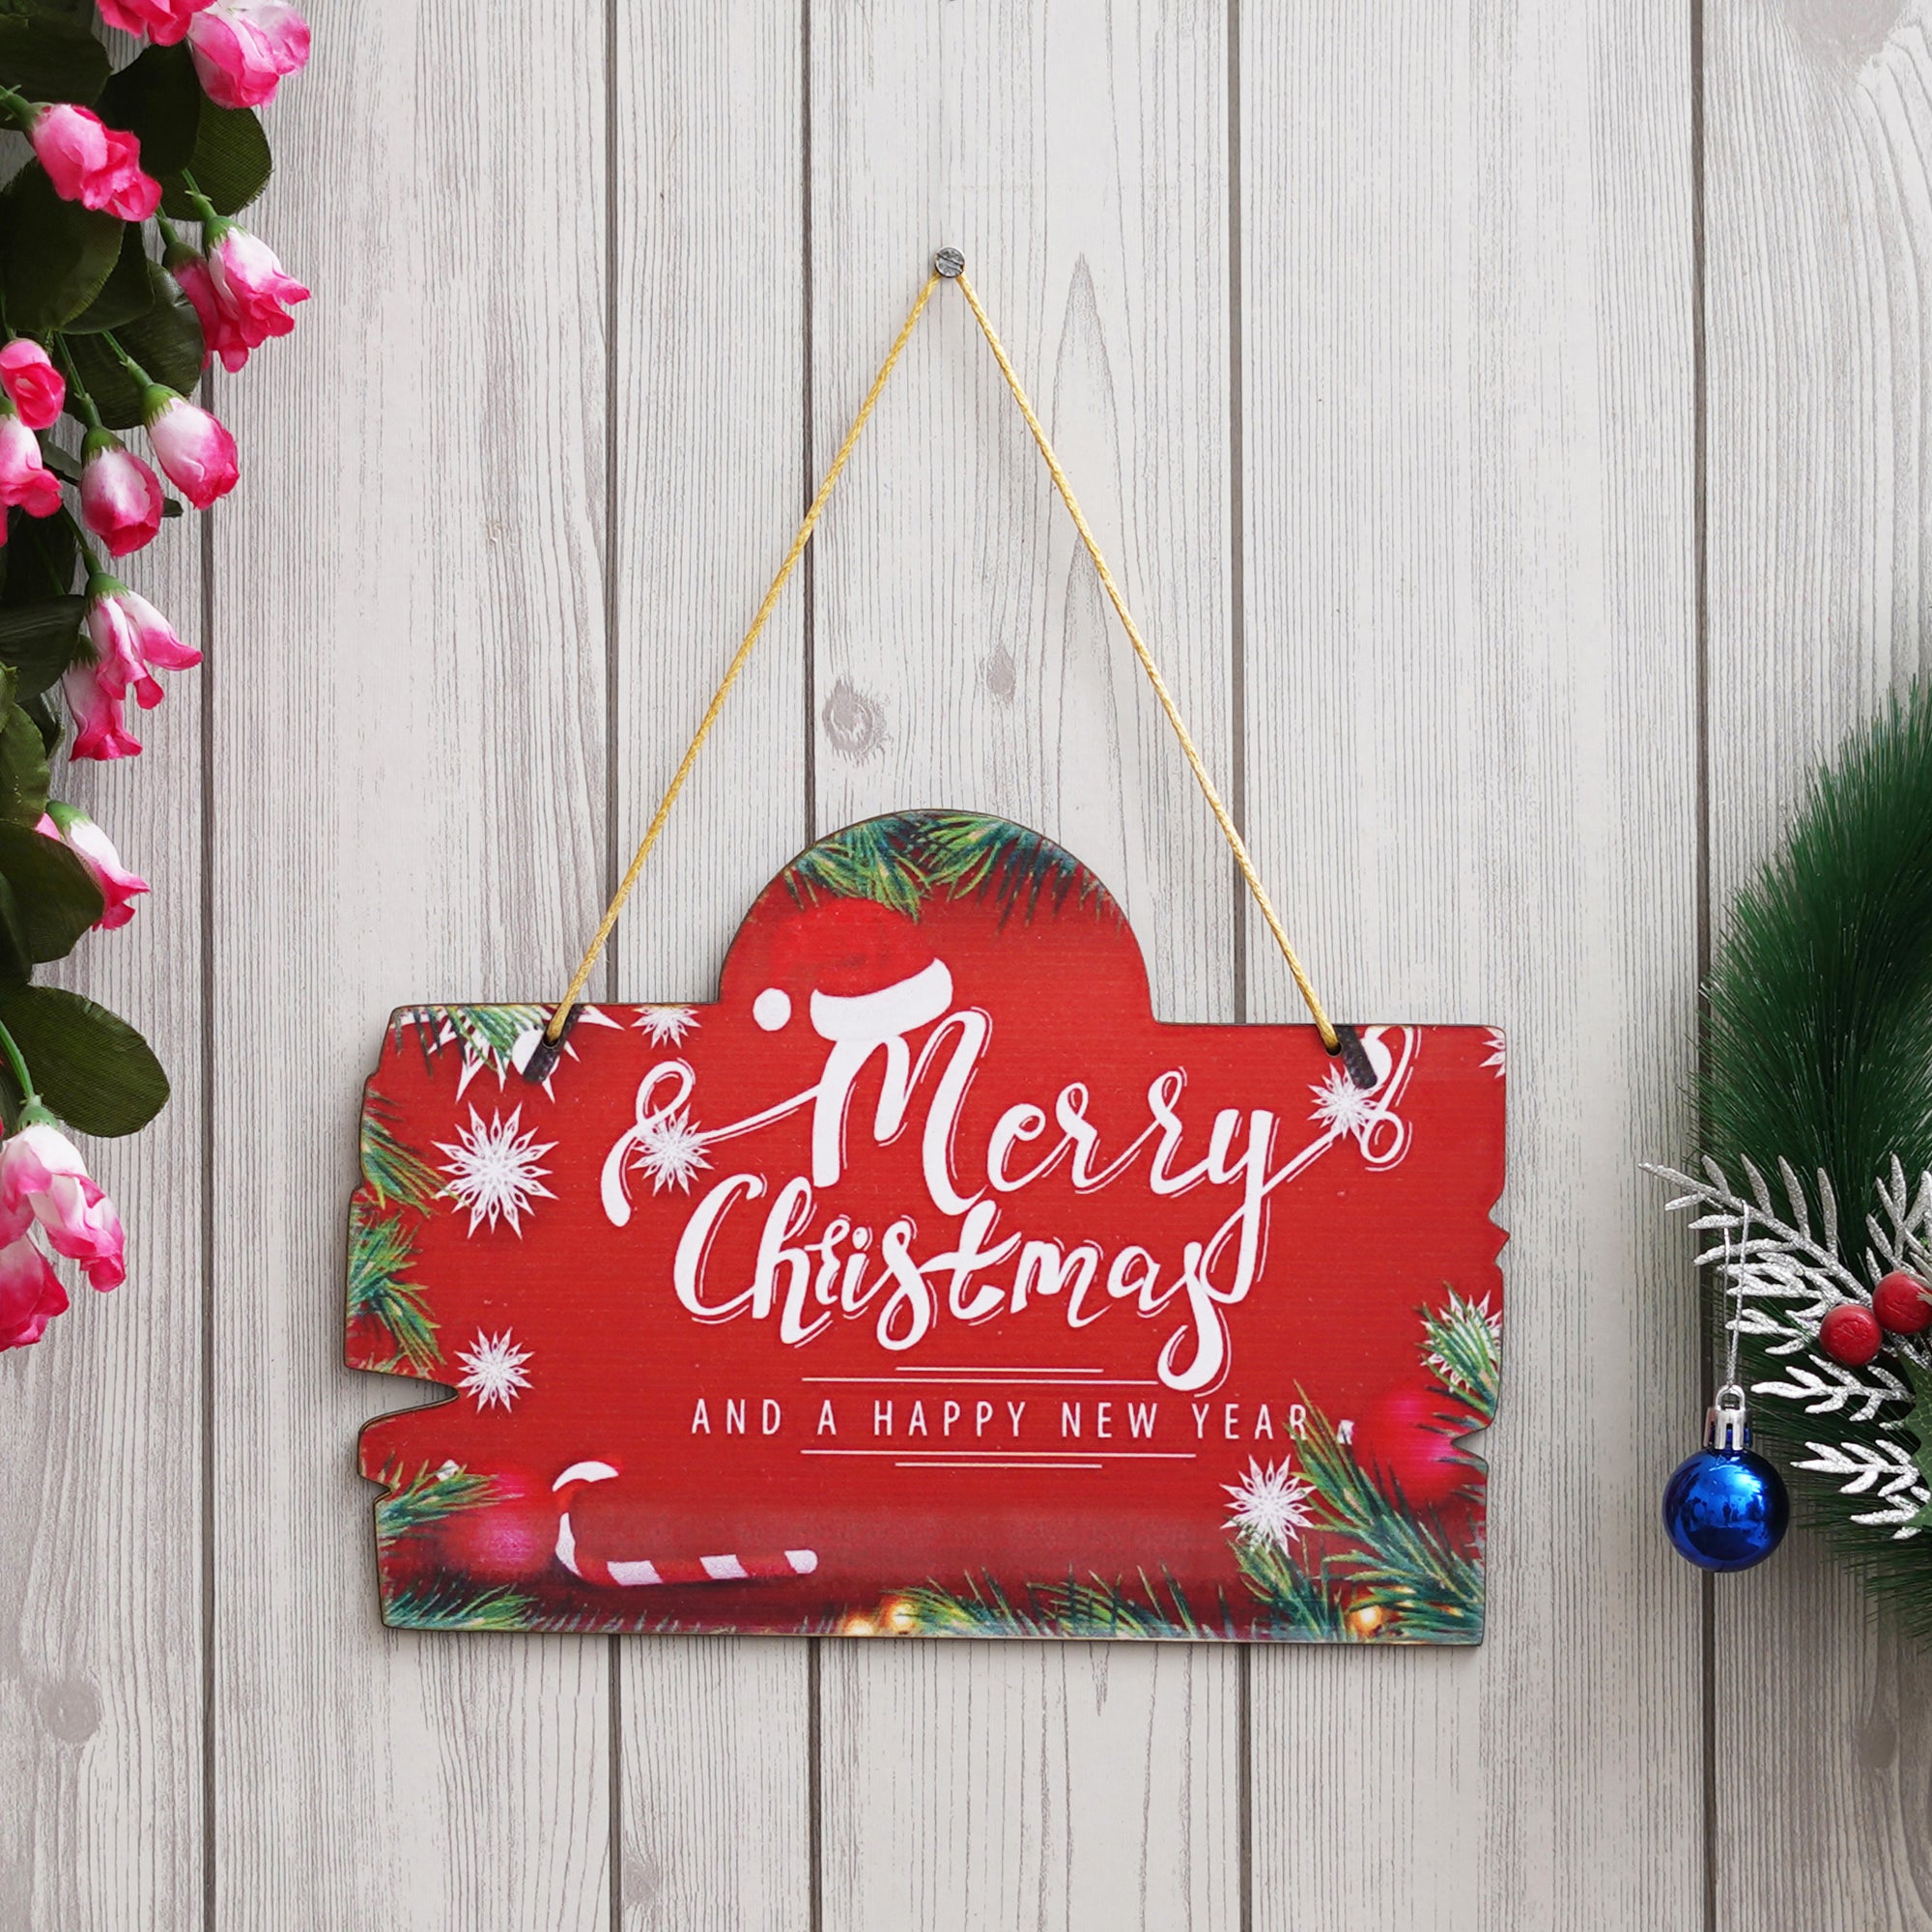 eCraftIndia "Merry Christmas and Happy New Year" Printed Door Wall Hanging for Home and Christmas Tree Decorations (Red, Green, White)